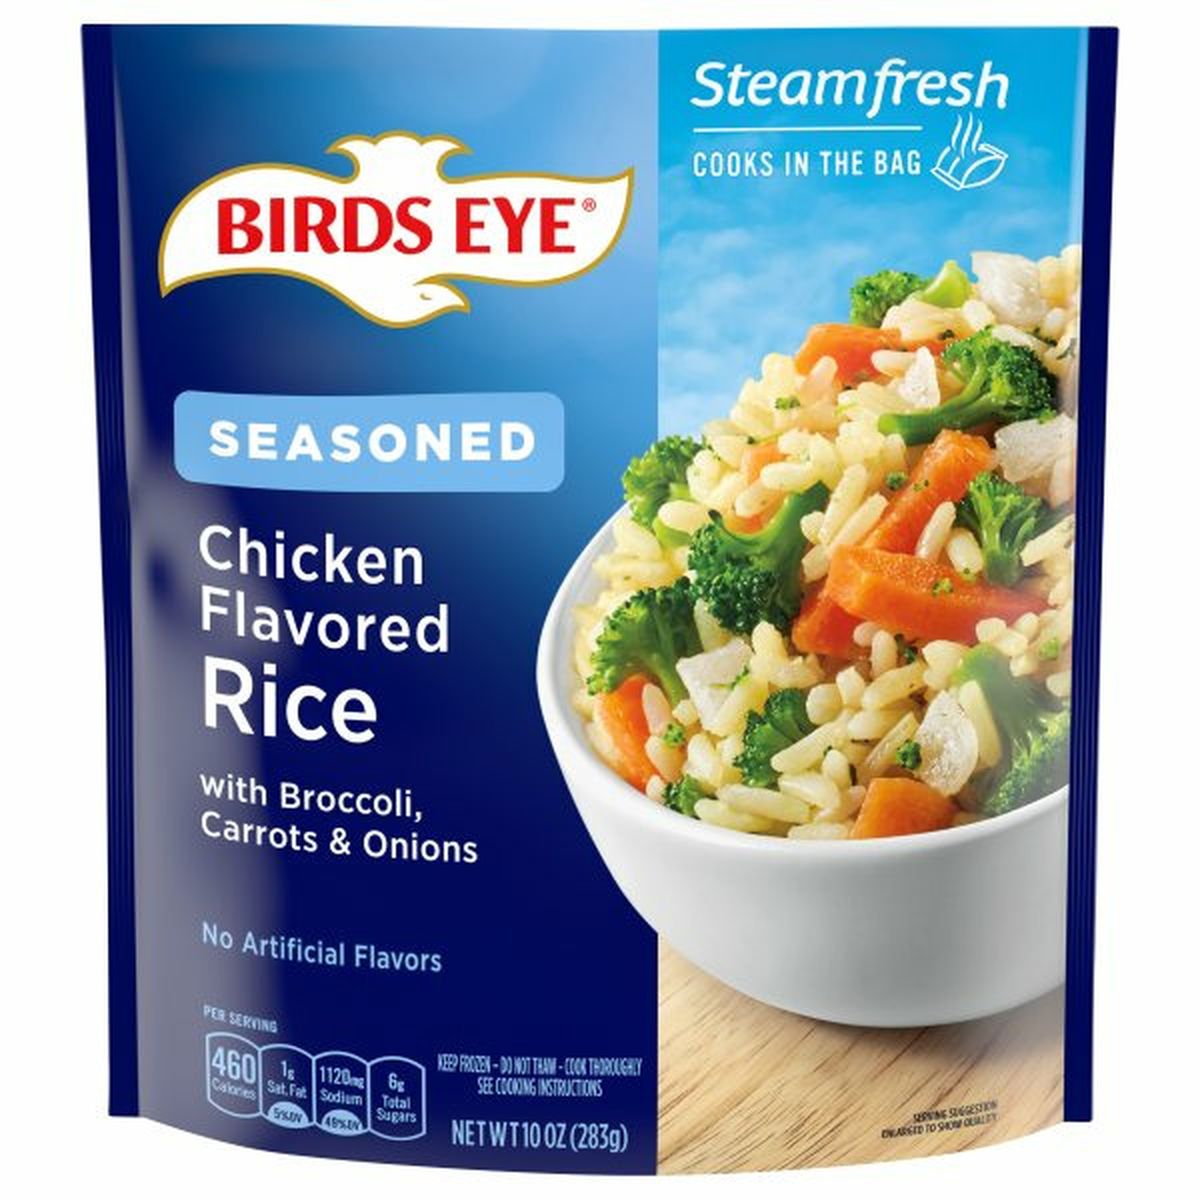 Calories in Birds Eye Steamfresh Chicken Flavored Rice, with Broccoli, Carrots & Onions, Seasoned